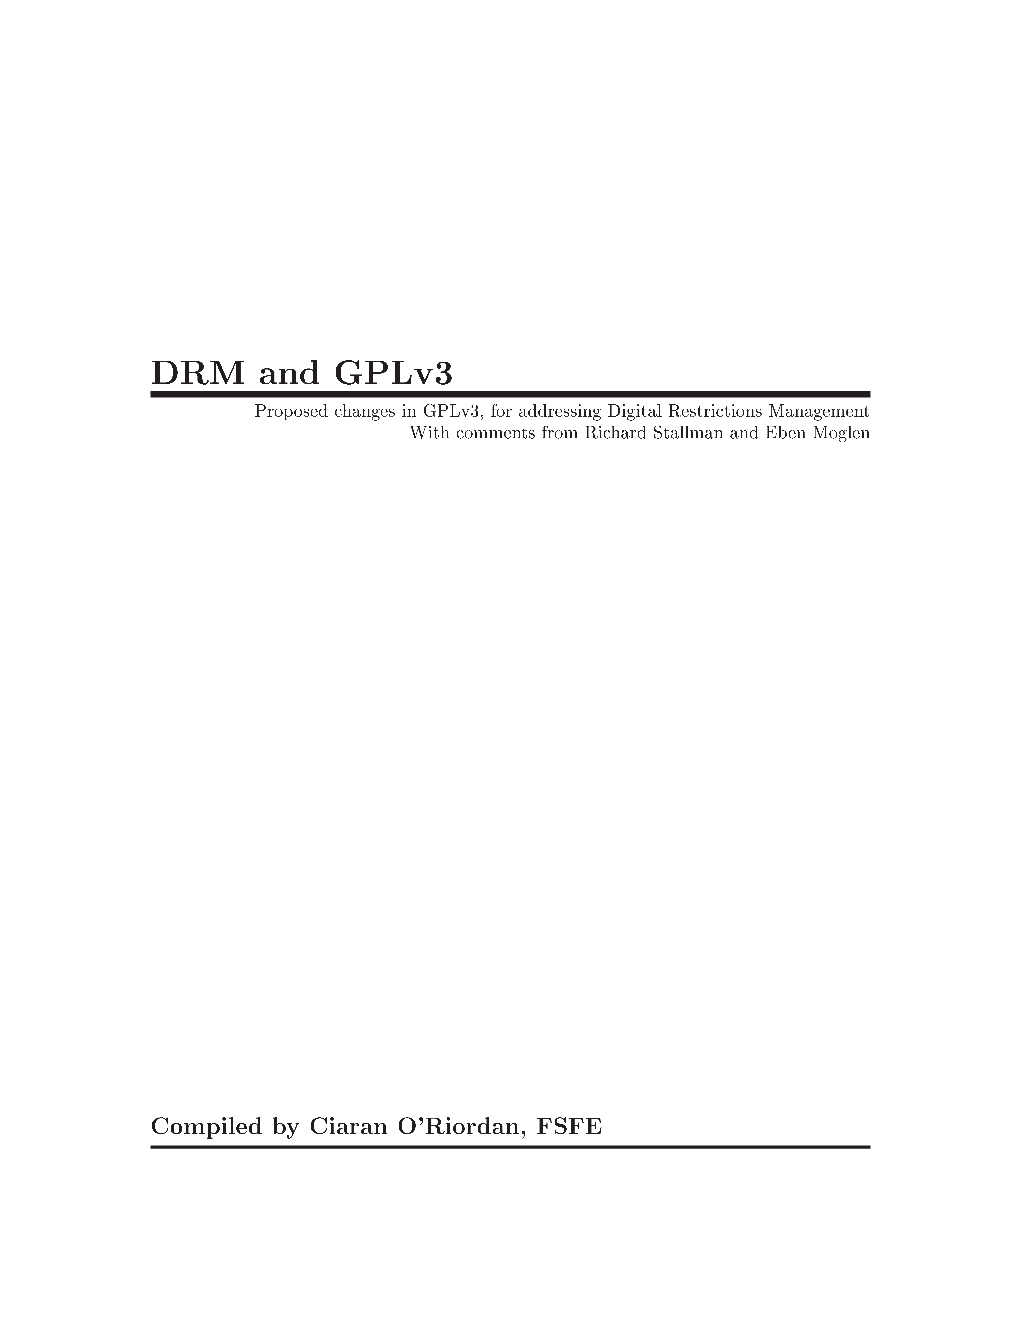 DRM and Gplv3 Proposed Changes in Gplv3, for Addressing Digital Restrictions Management with Comments from Richard Stallman and Eben Moglen